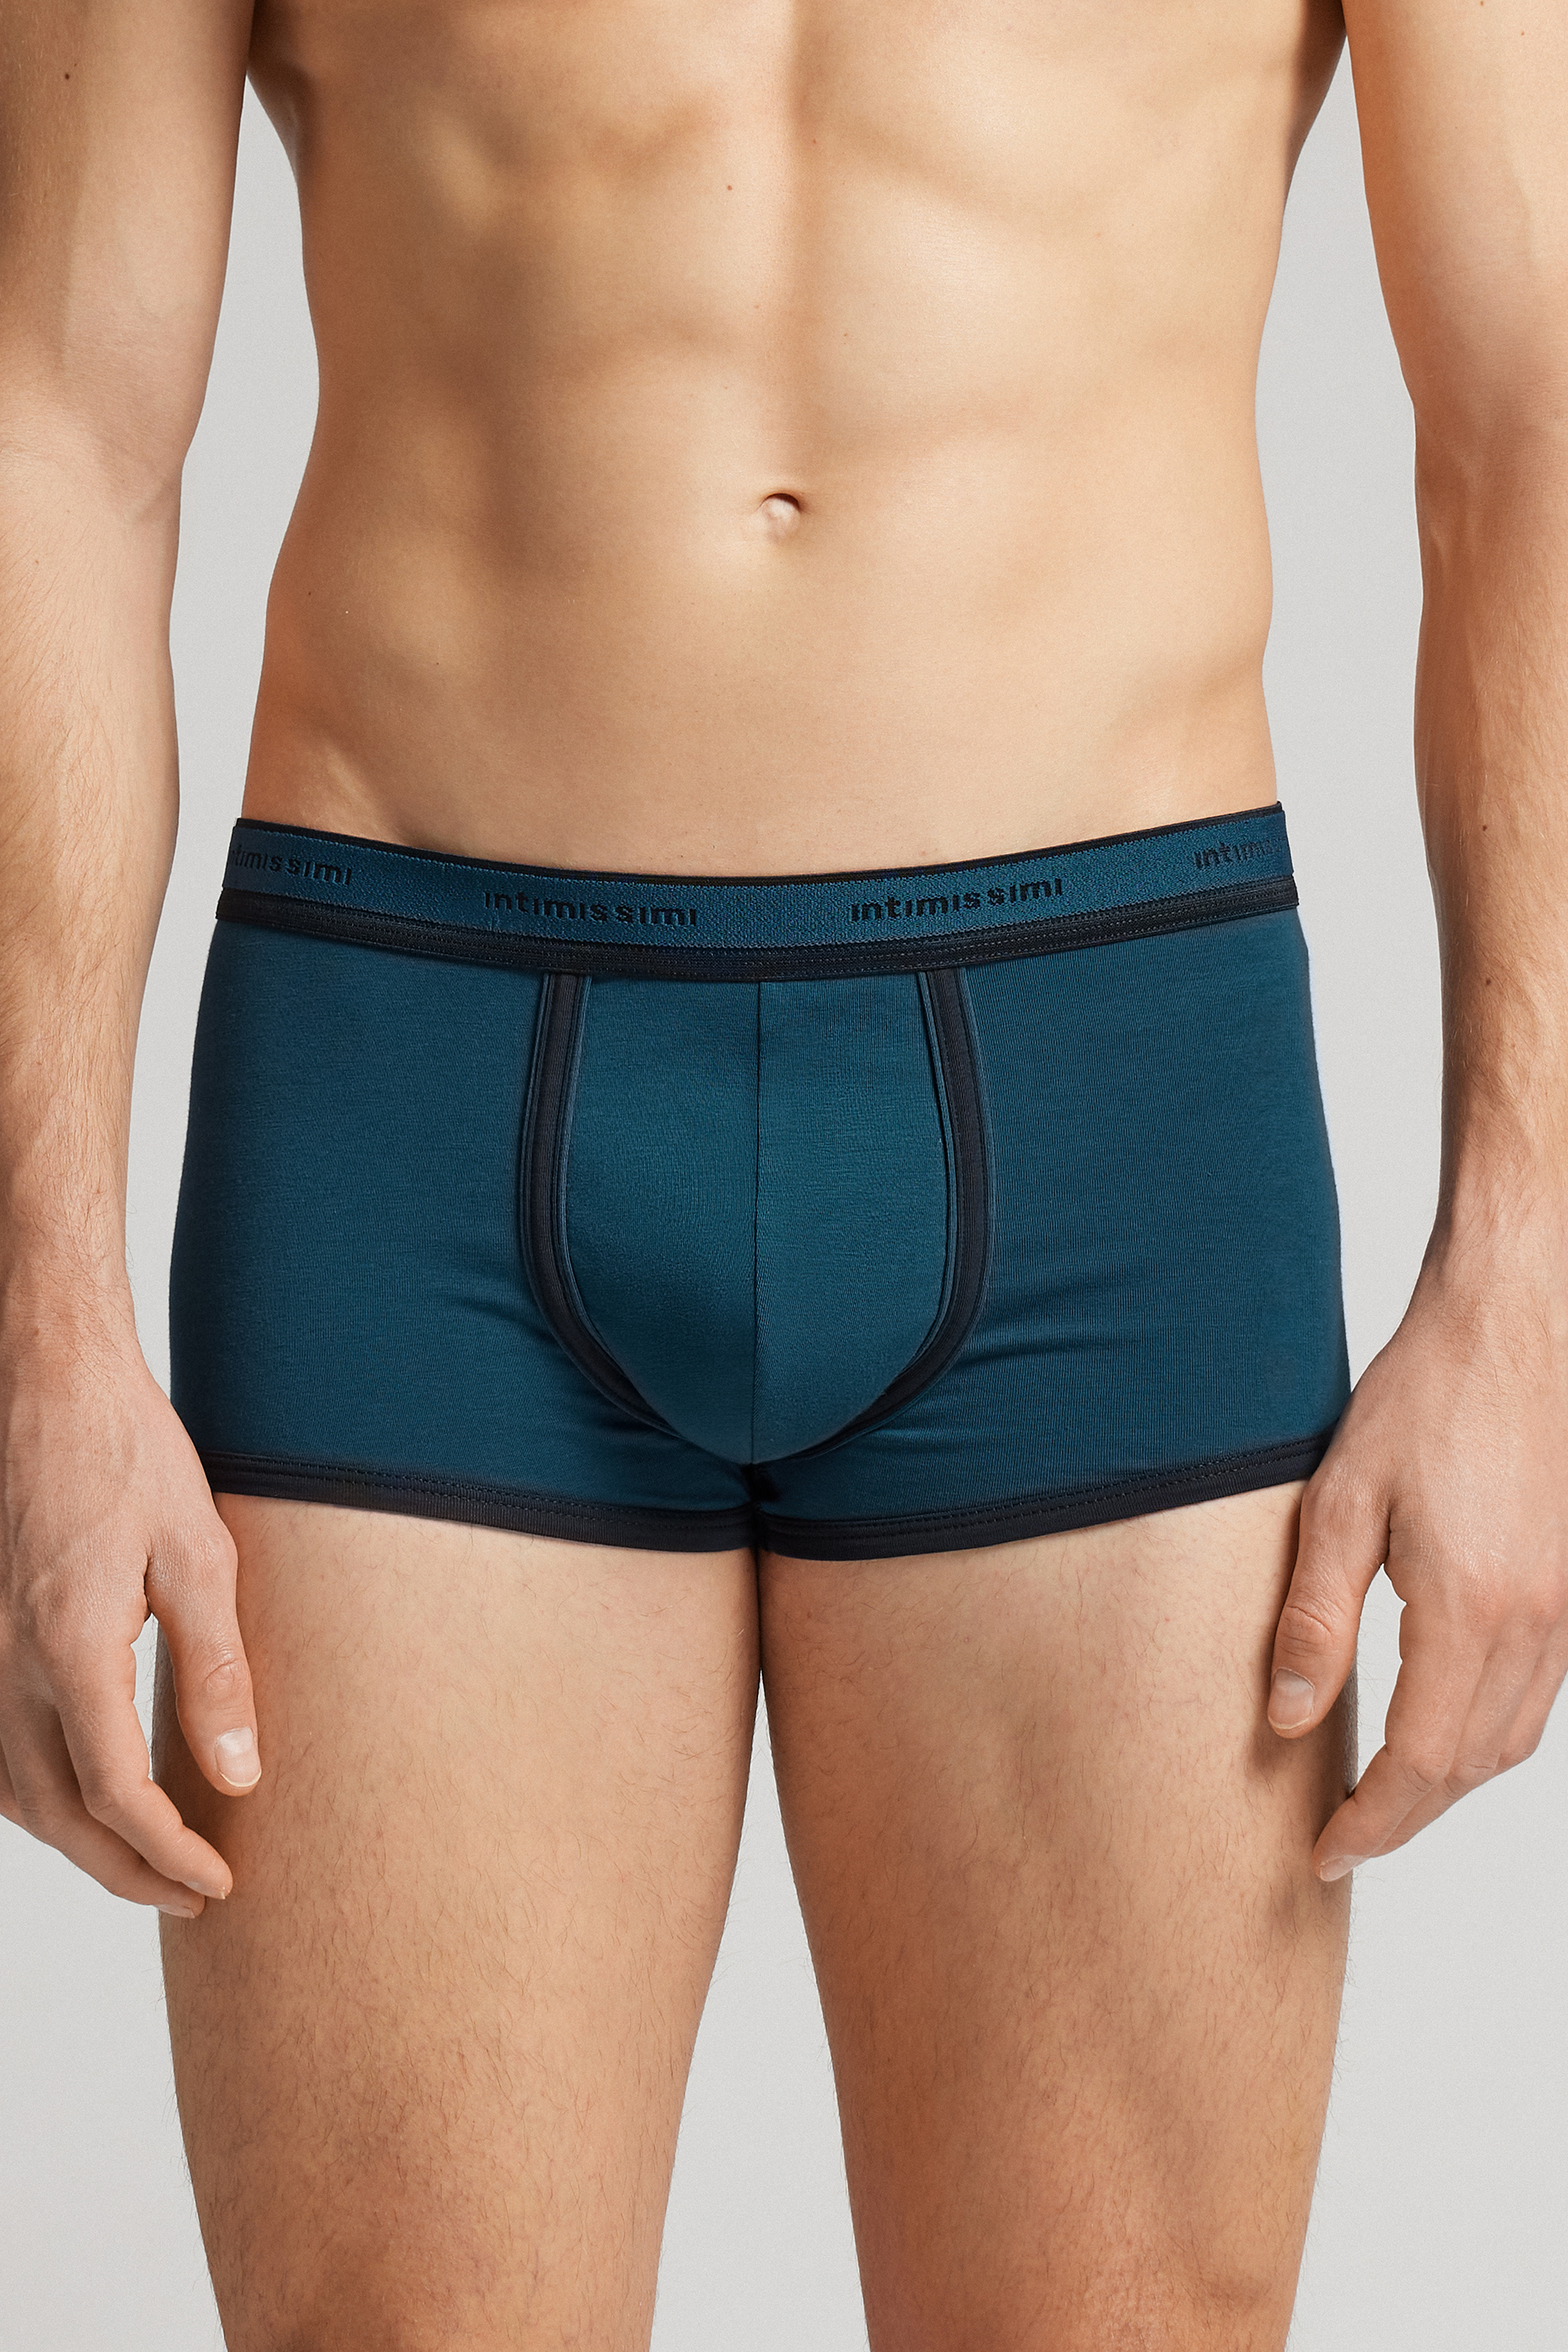 Intimissimi Uomo - Supima® cotton boxers collection. The premium quality  fabric is incredibly soft and breathable with great stretch. I SBU12C I  #intimissimiuomo #boxer #tshirt #supima #supimacotton